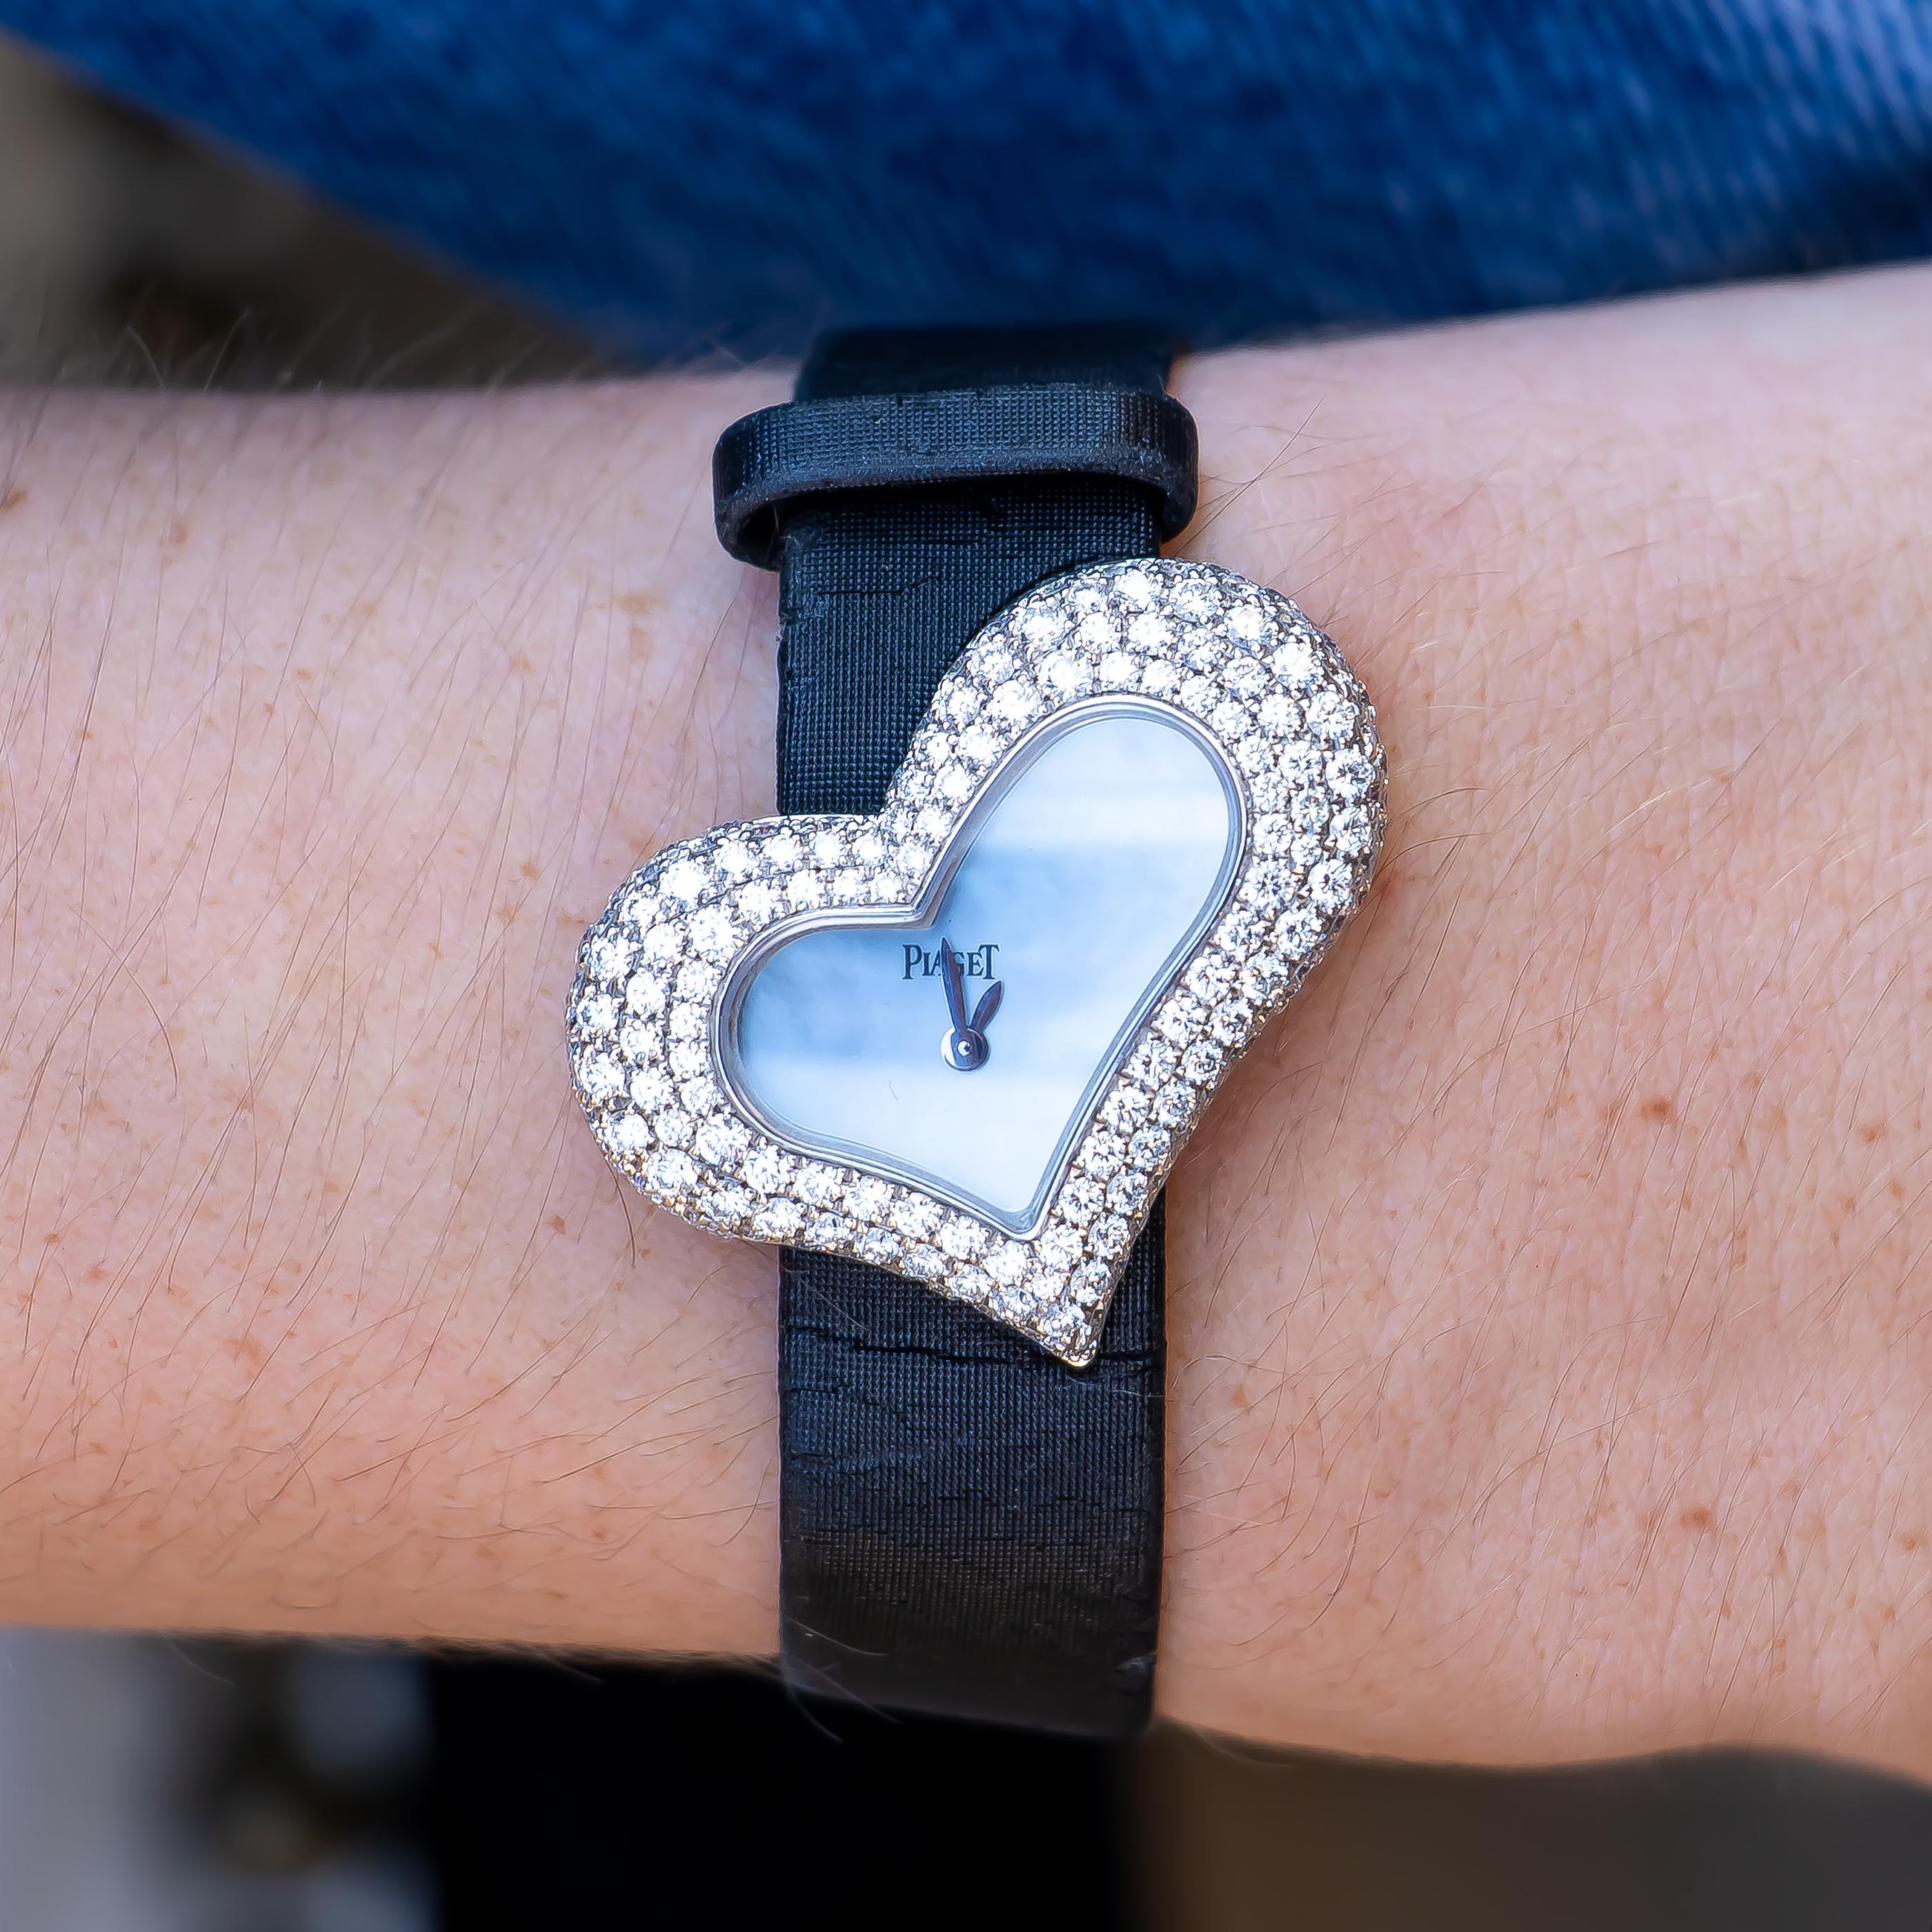 Brand: Piaget

Model # GOA29131

Movement: Quartz, Swiss Made

Case/Dial: Mother Of Pearl Dial, 18K White Gold Heart Shape Case With Factory Set Diamonds 38mm Width

Bracelet: 18K White Gold & Piaget Diamond Set Buckle

Wrist Size: